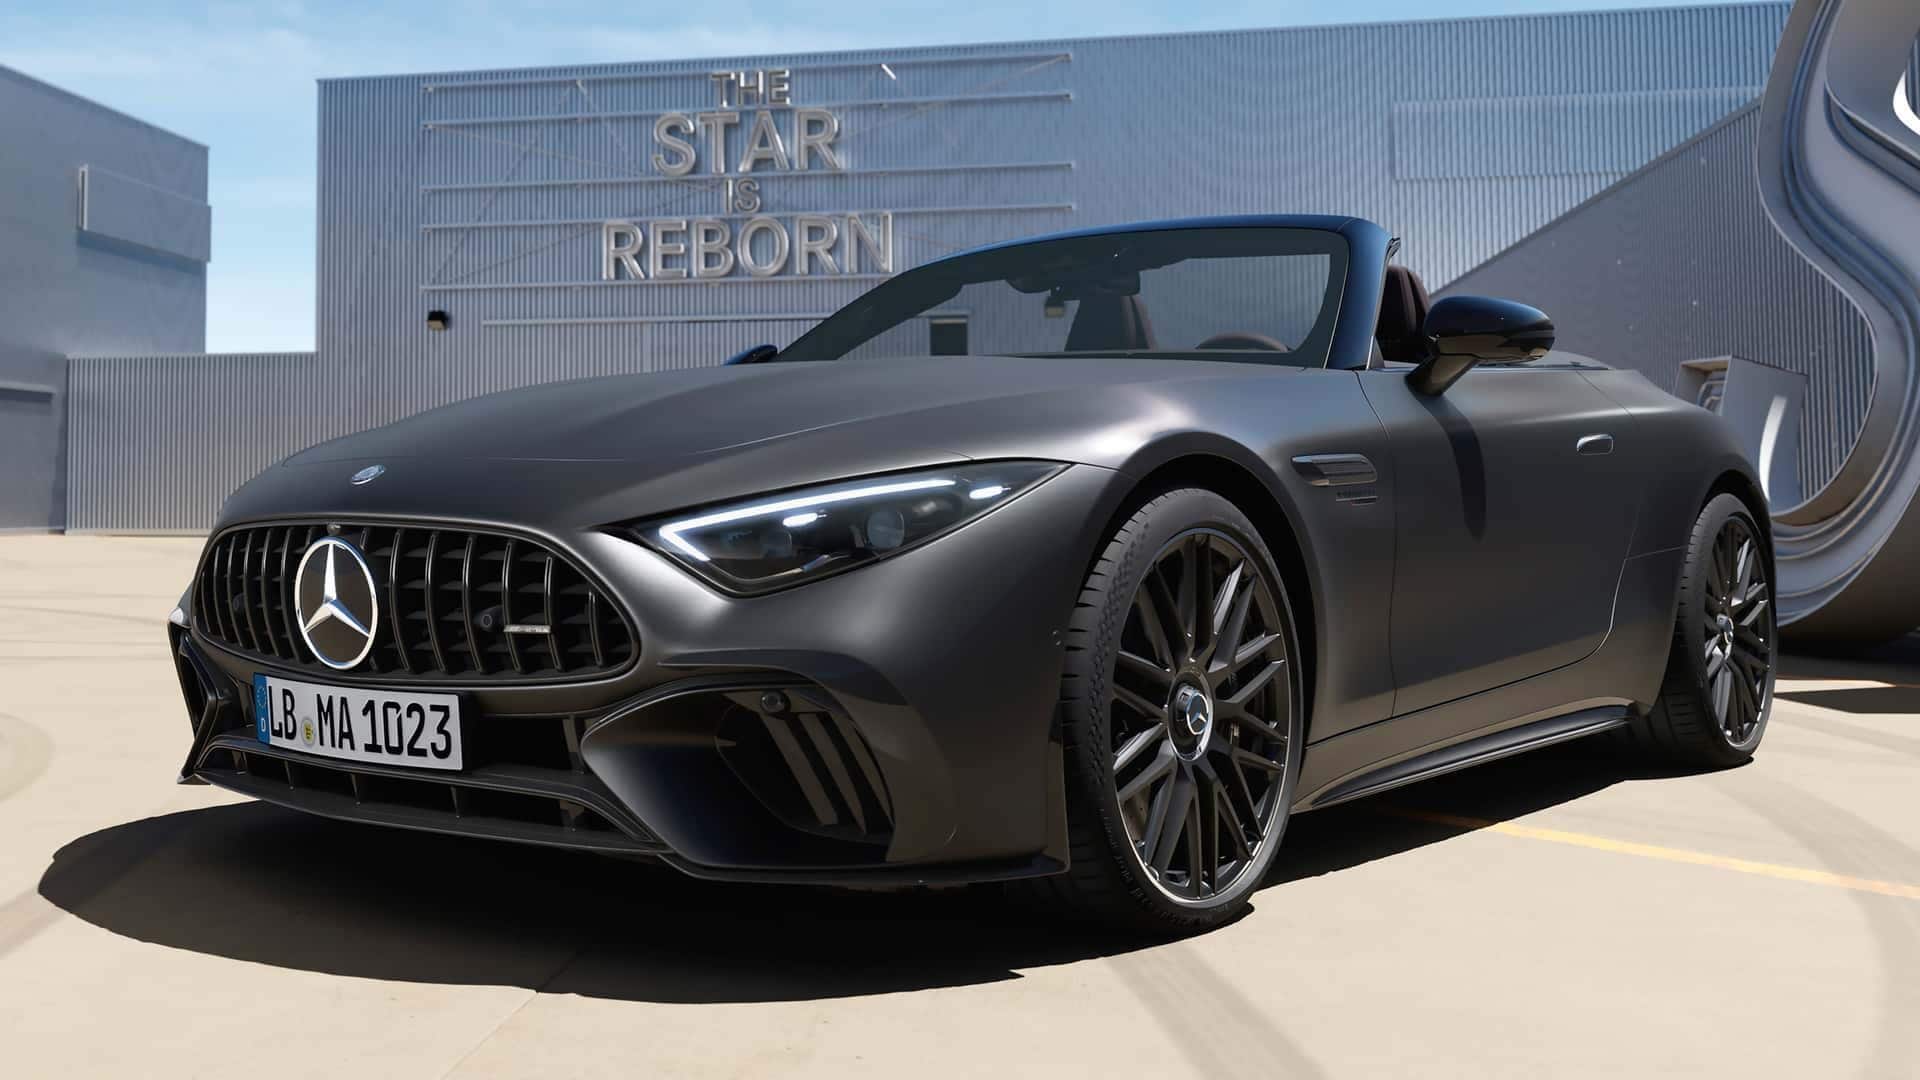 Mercedes-AMG unveils its most powerful SL car with 816hp output